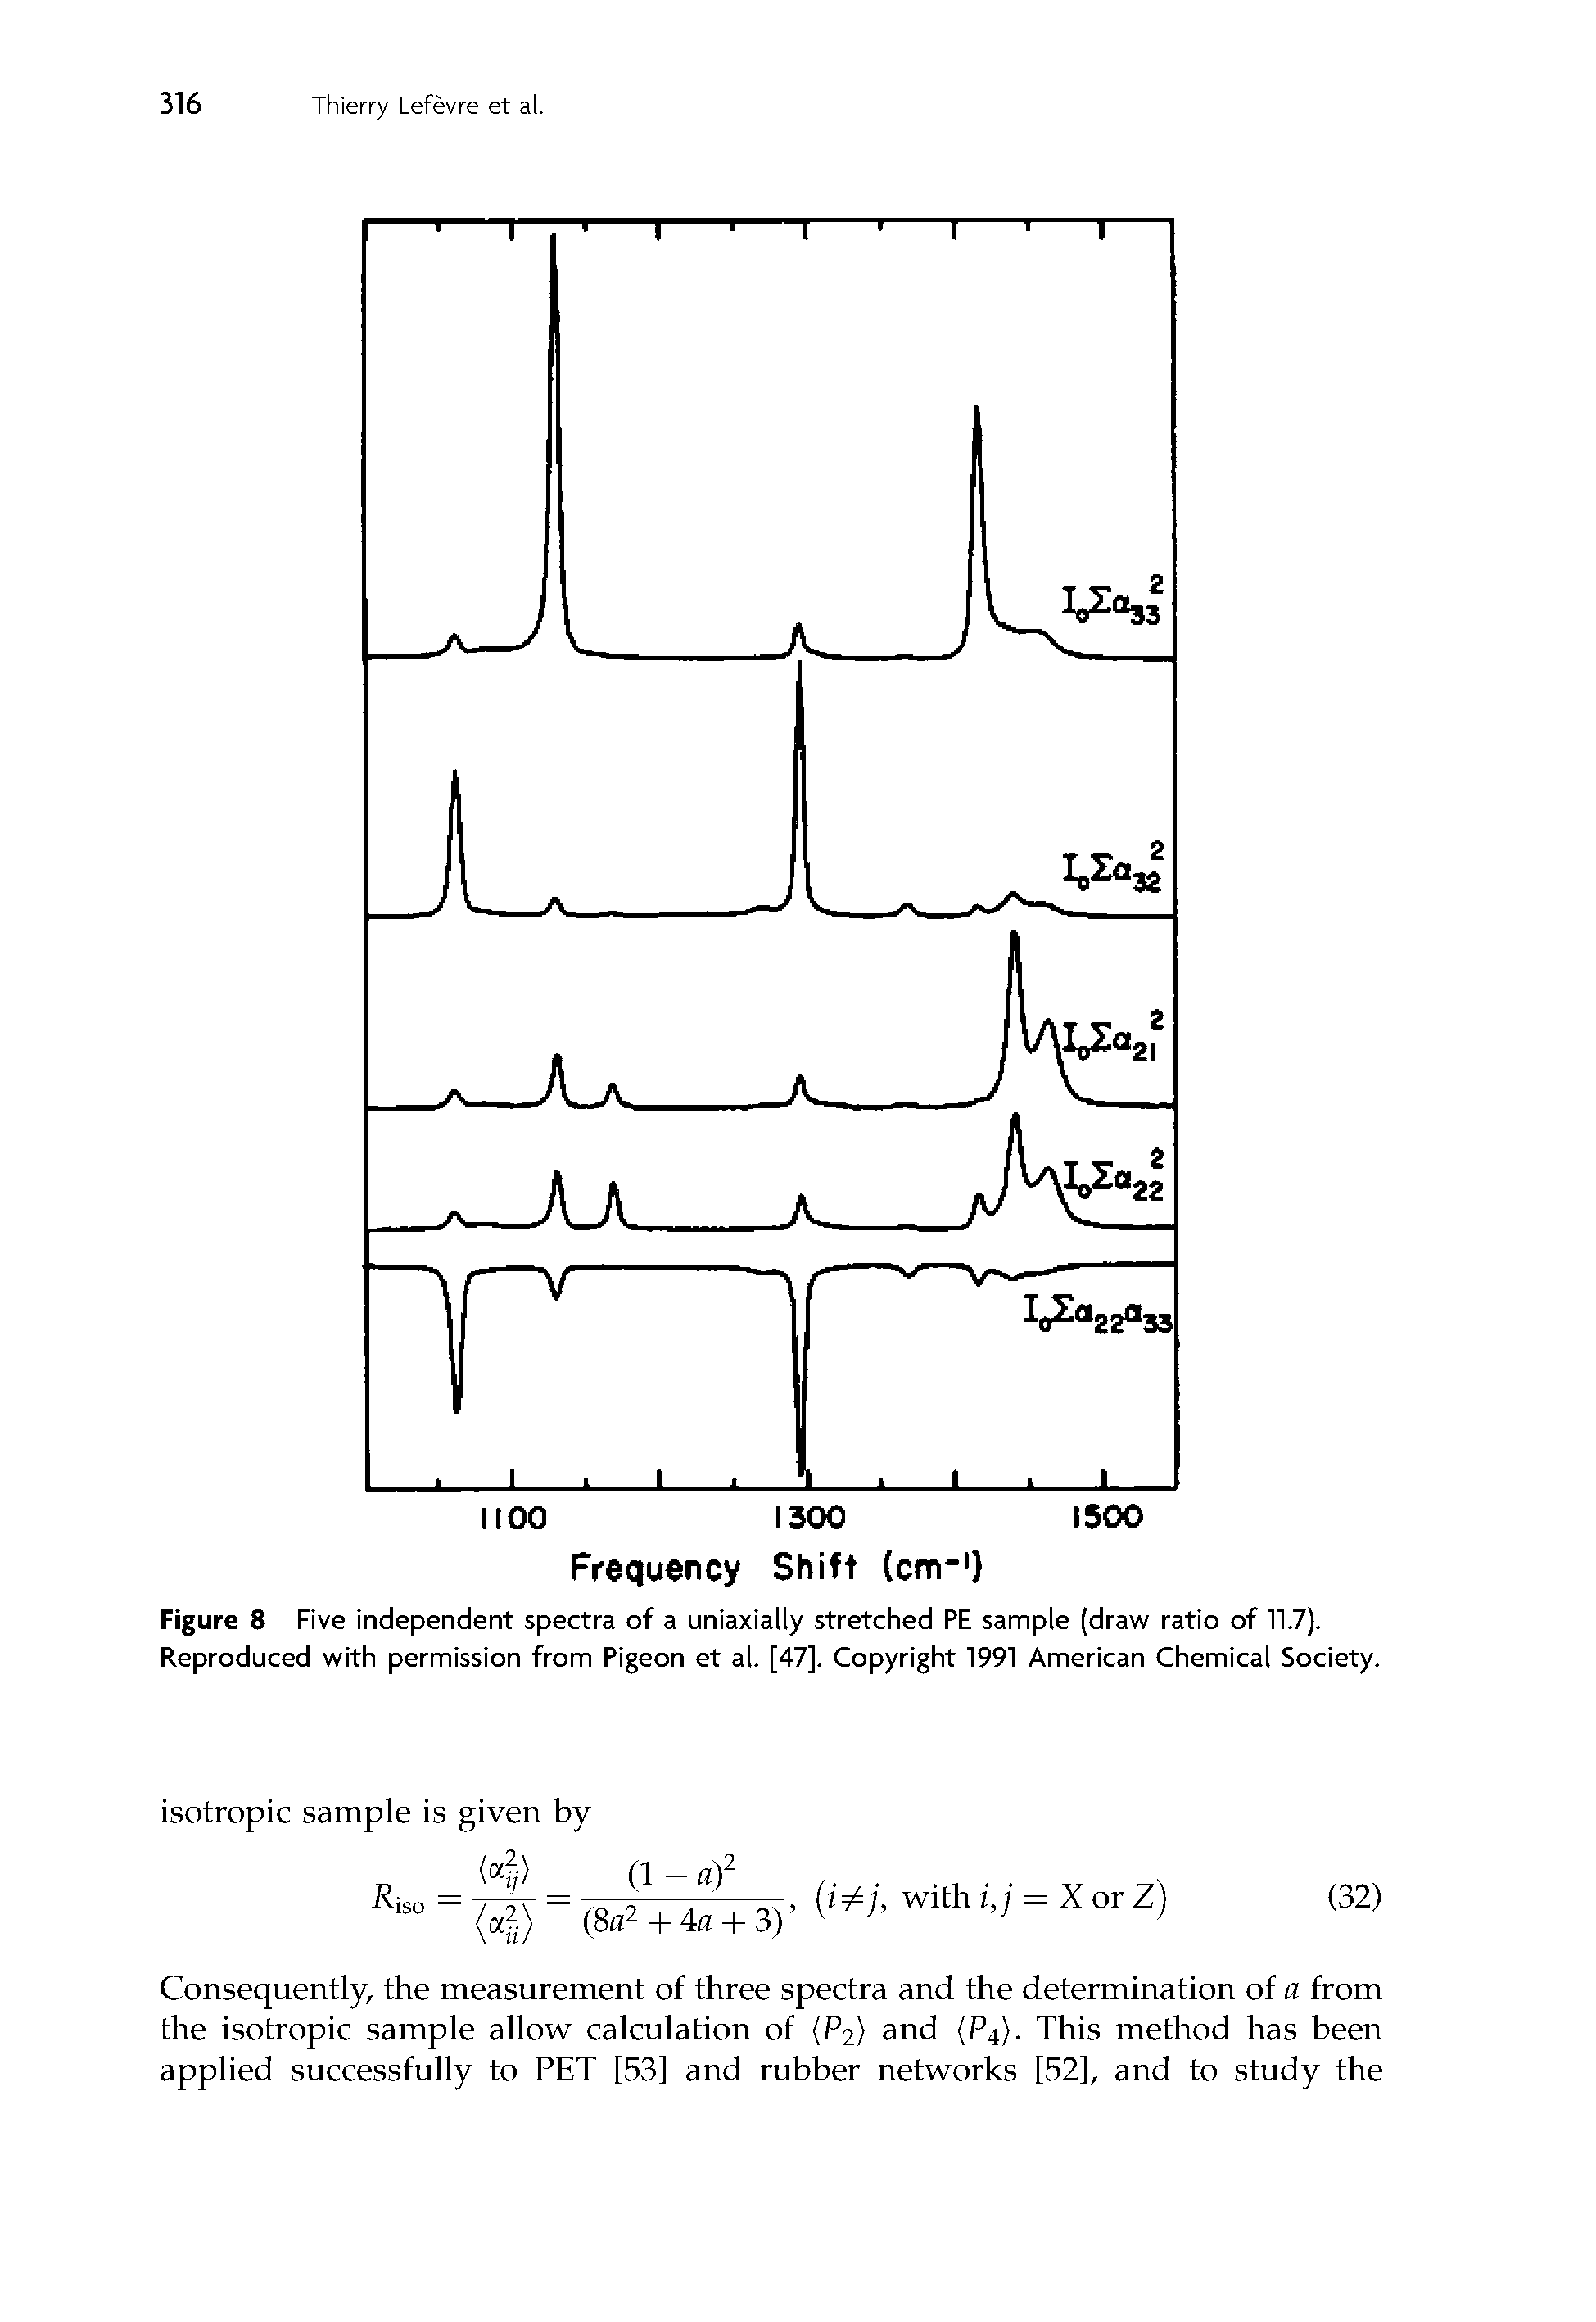 Figure 8 Five independent spectra of a uniaxially stretched PE sample (draw ratio of 11.7). Reproduced with permission from Pigeon et al. [47]. Copyright 1991 American Chemical Society.